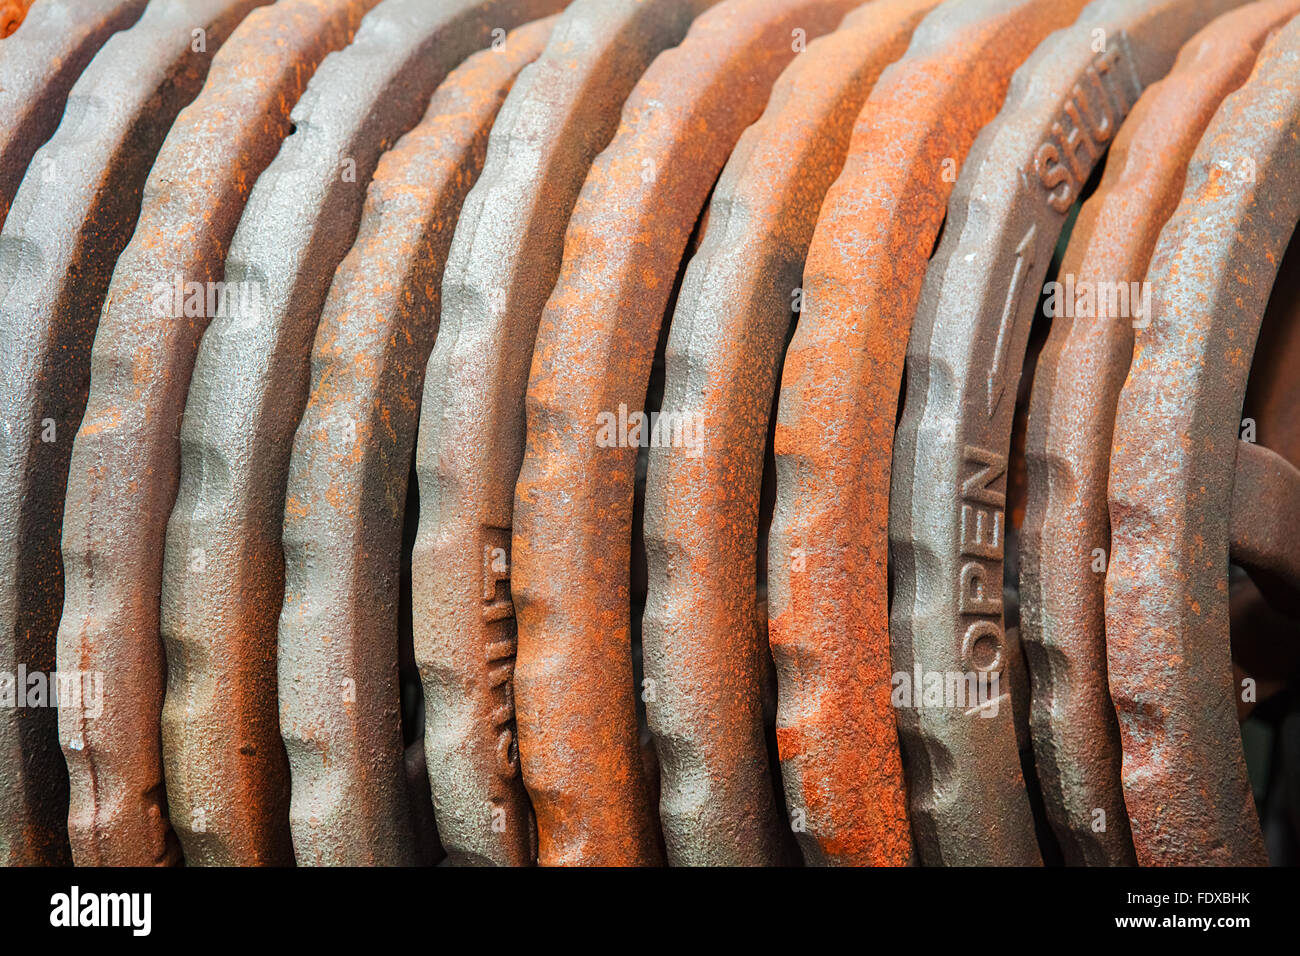 Steel rusted hand wheels in warehouse Stock Photo